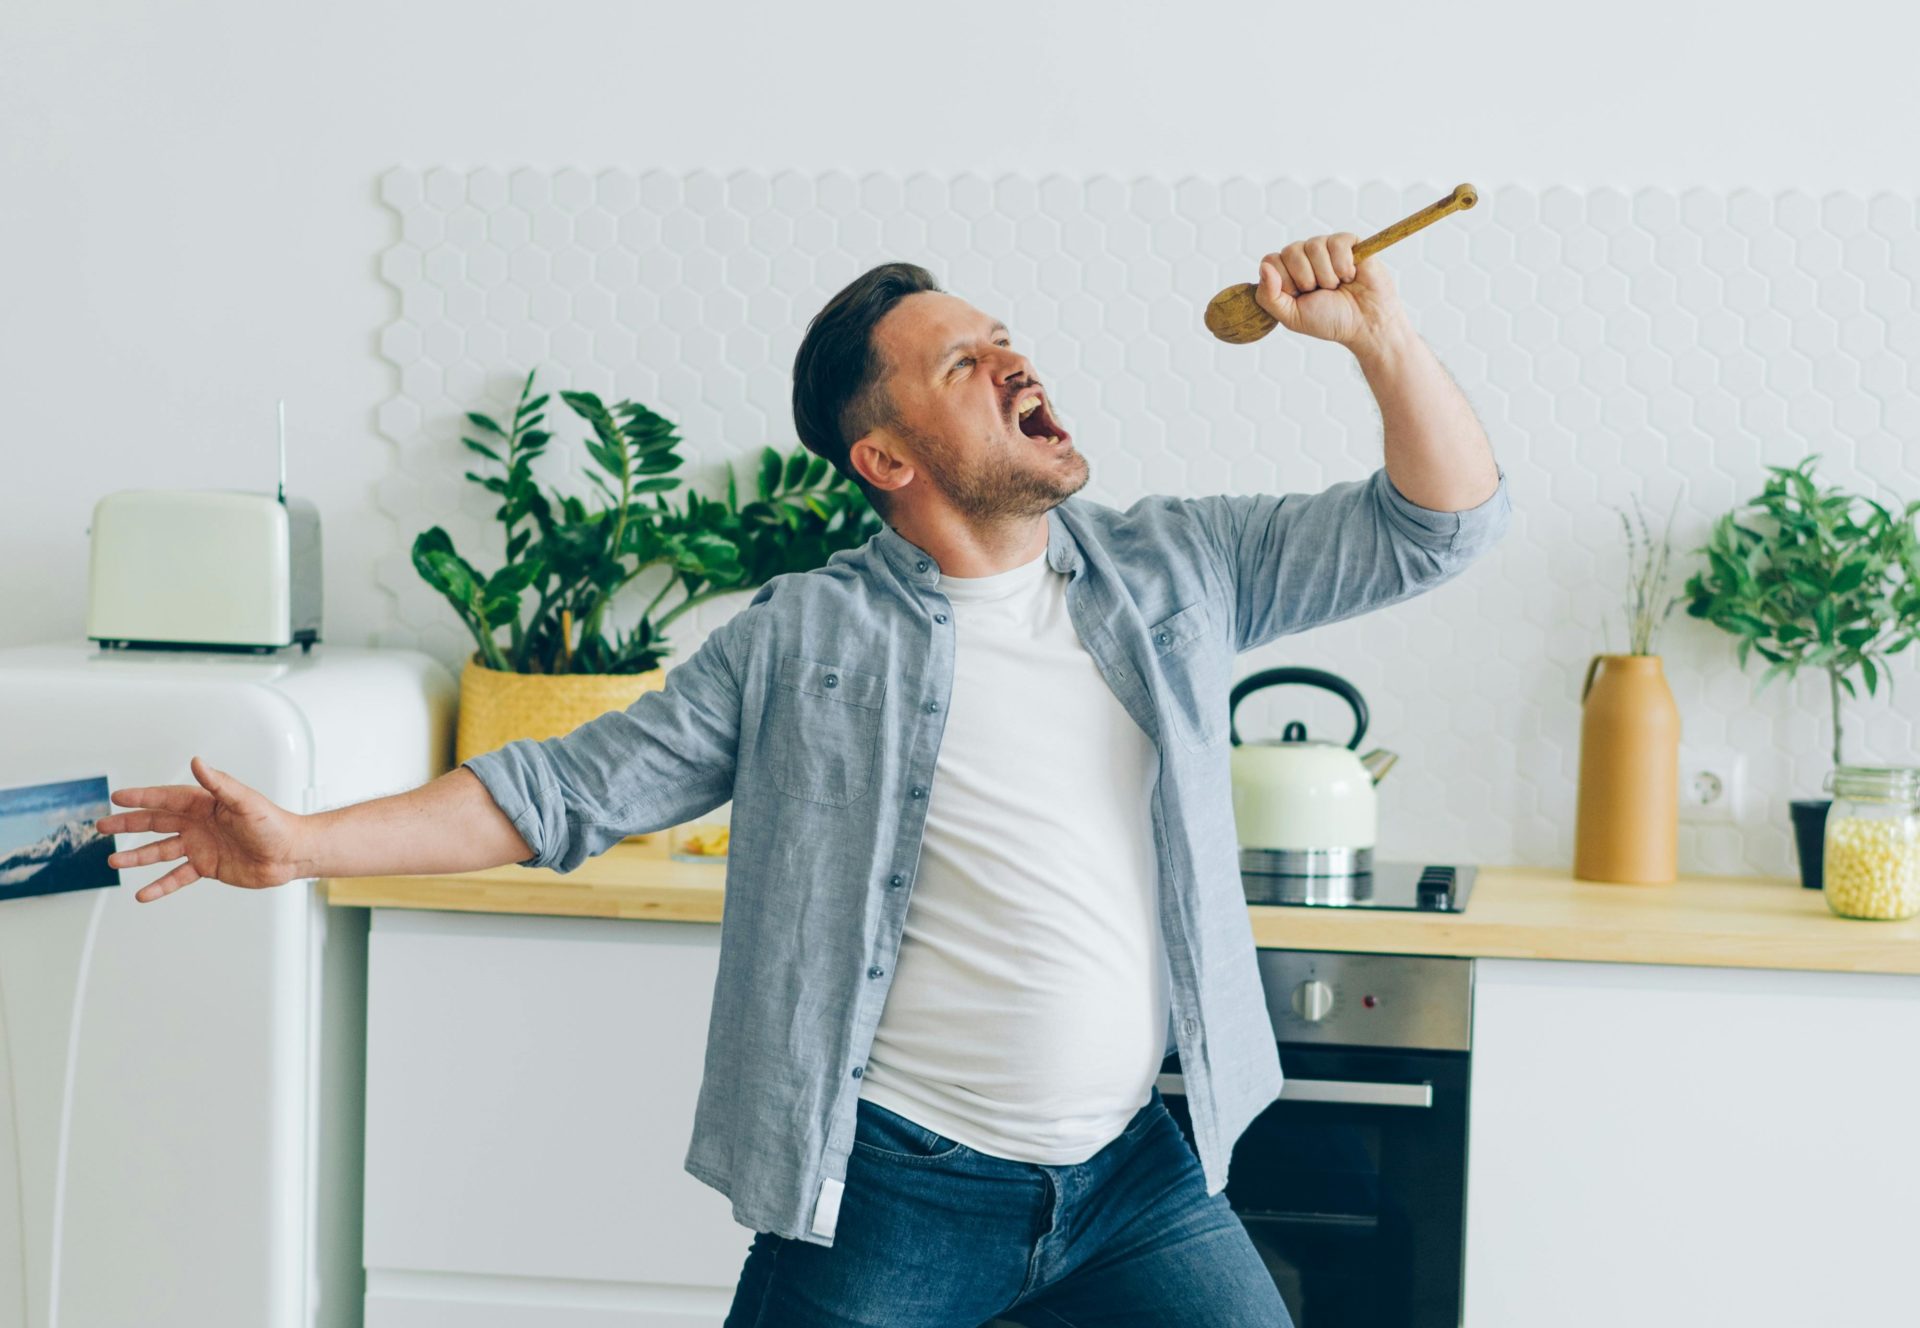 Man singing using a wooden spoon as a pretend microphone. Image: Pexels